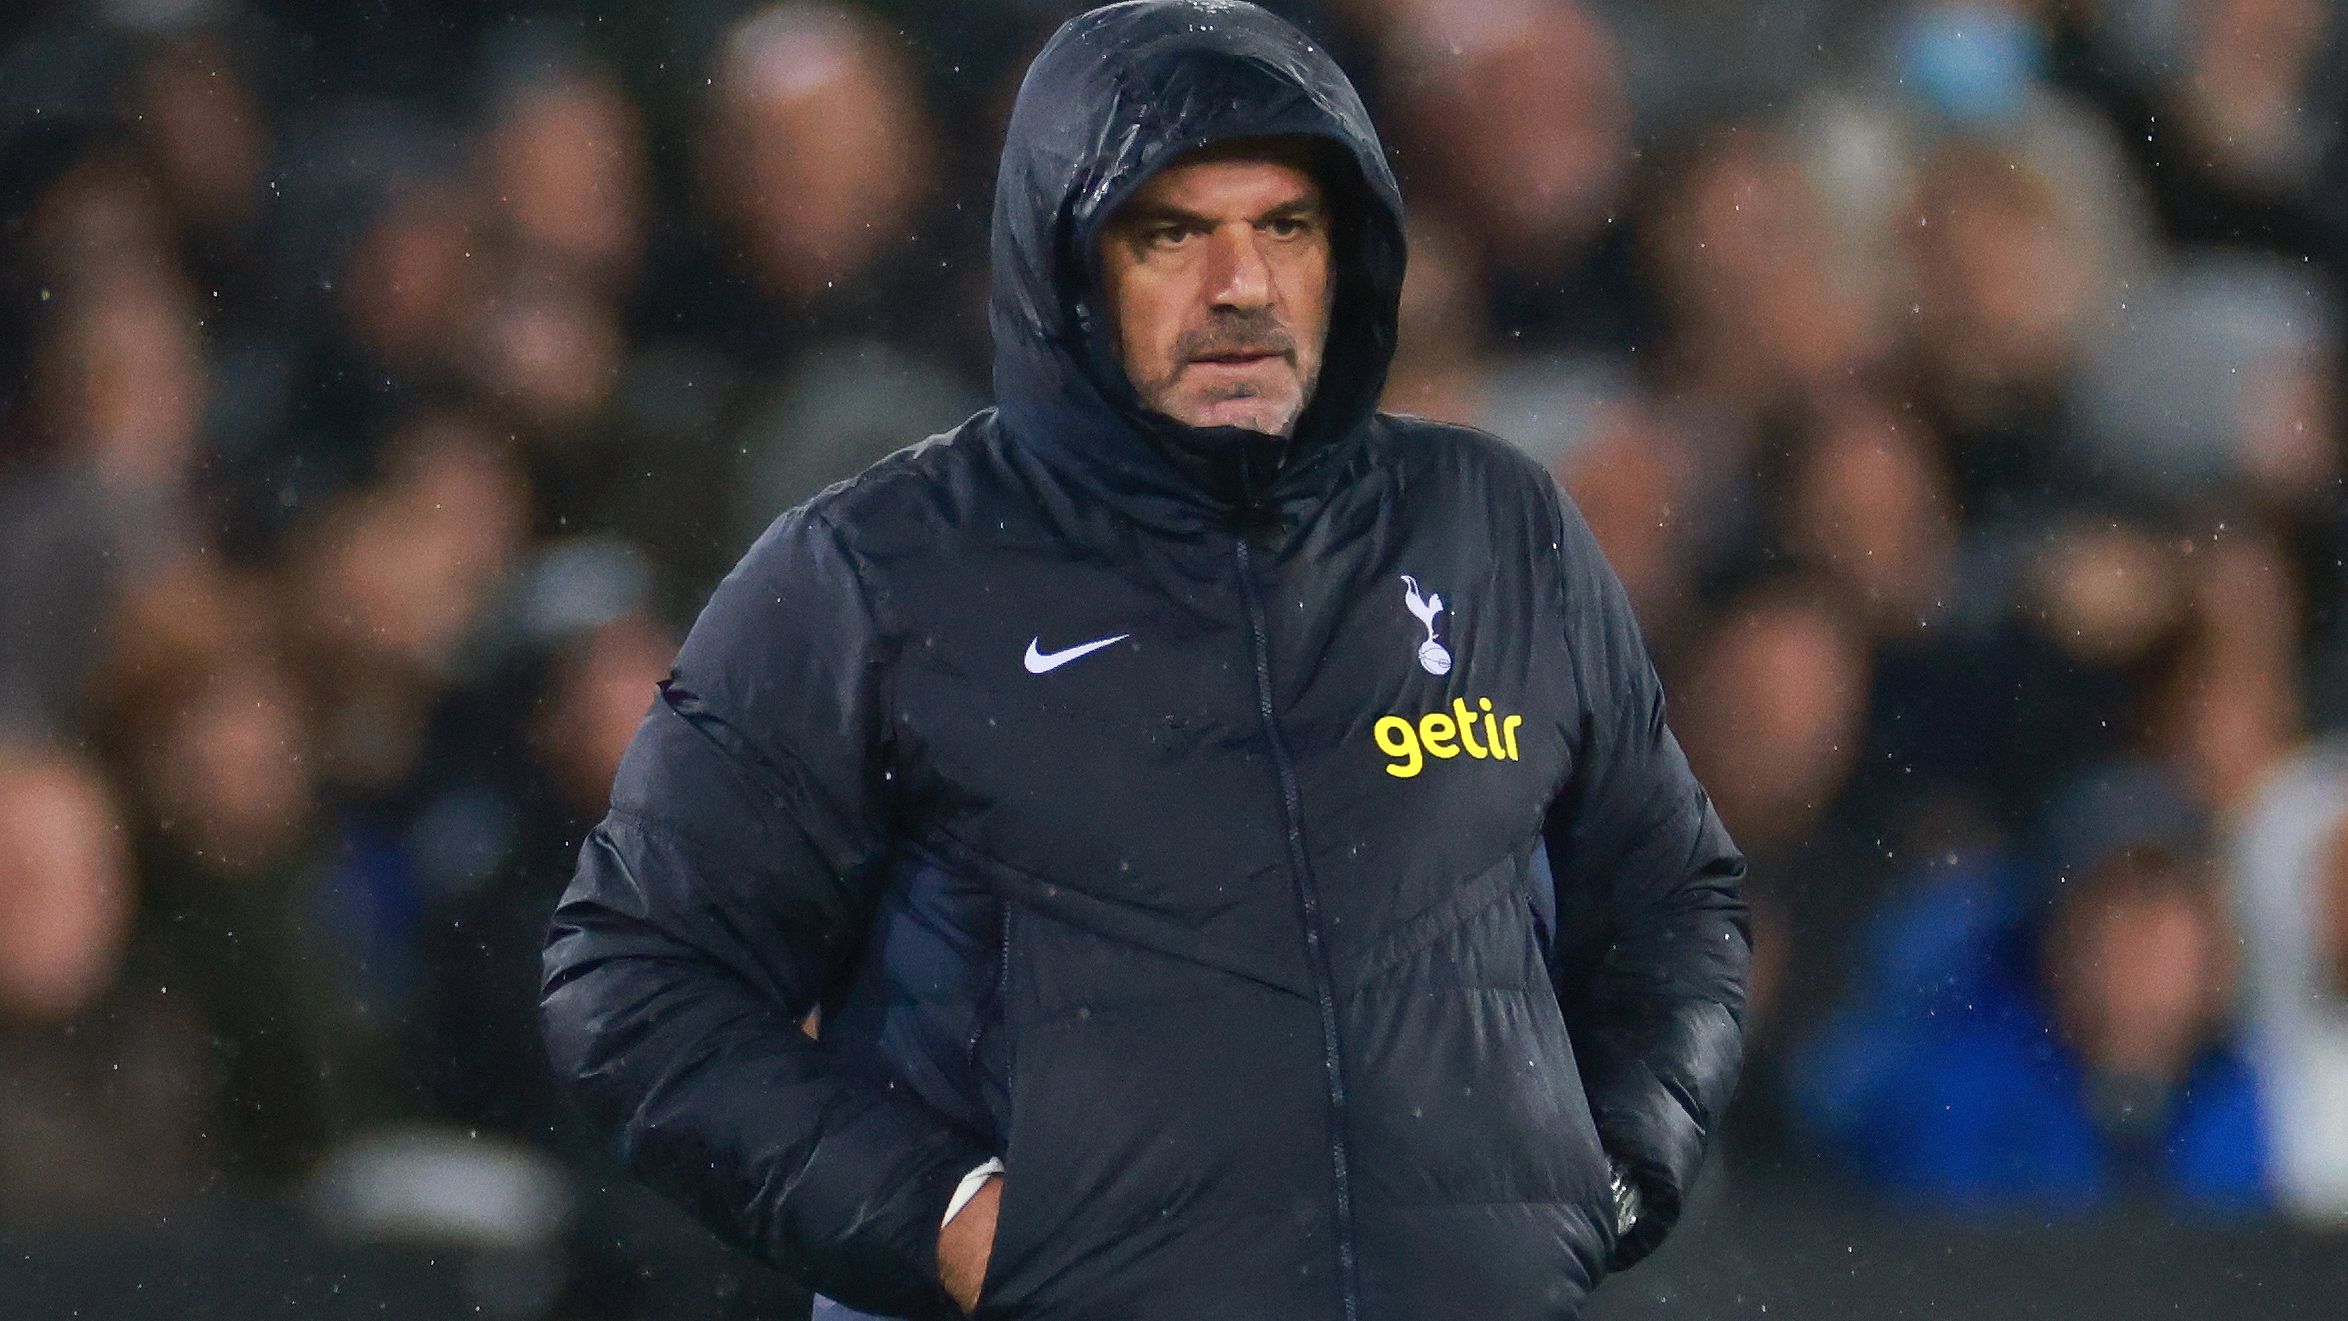 Ange Postecoglou frustrated as soft West Ham goal puts dent in Champions League hopes